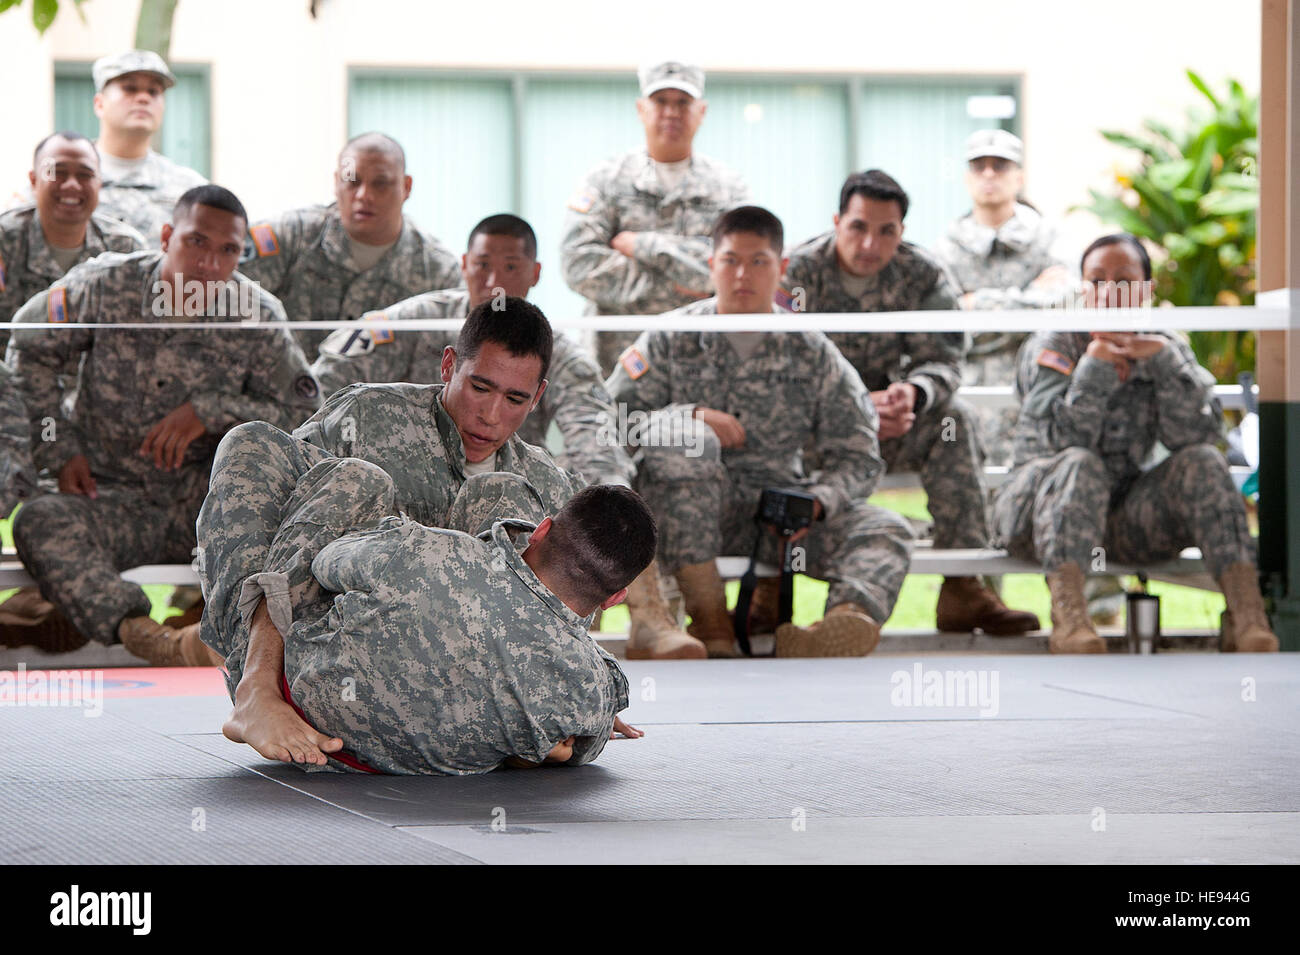 U.S. Army soldiers, Army National Guard, Hawaii, compete during the combatives portion of the Best Warrior Competition March 2, 2014, at Marine Corps Training Area Bellows, Hawaii. Modern Army Combatives is a close quarters combatives system designed to allow a soldier to close with the enemy and destroy them.  Staff Sgt. Christopher Hubenthal) Stock Photo